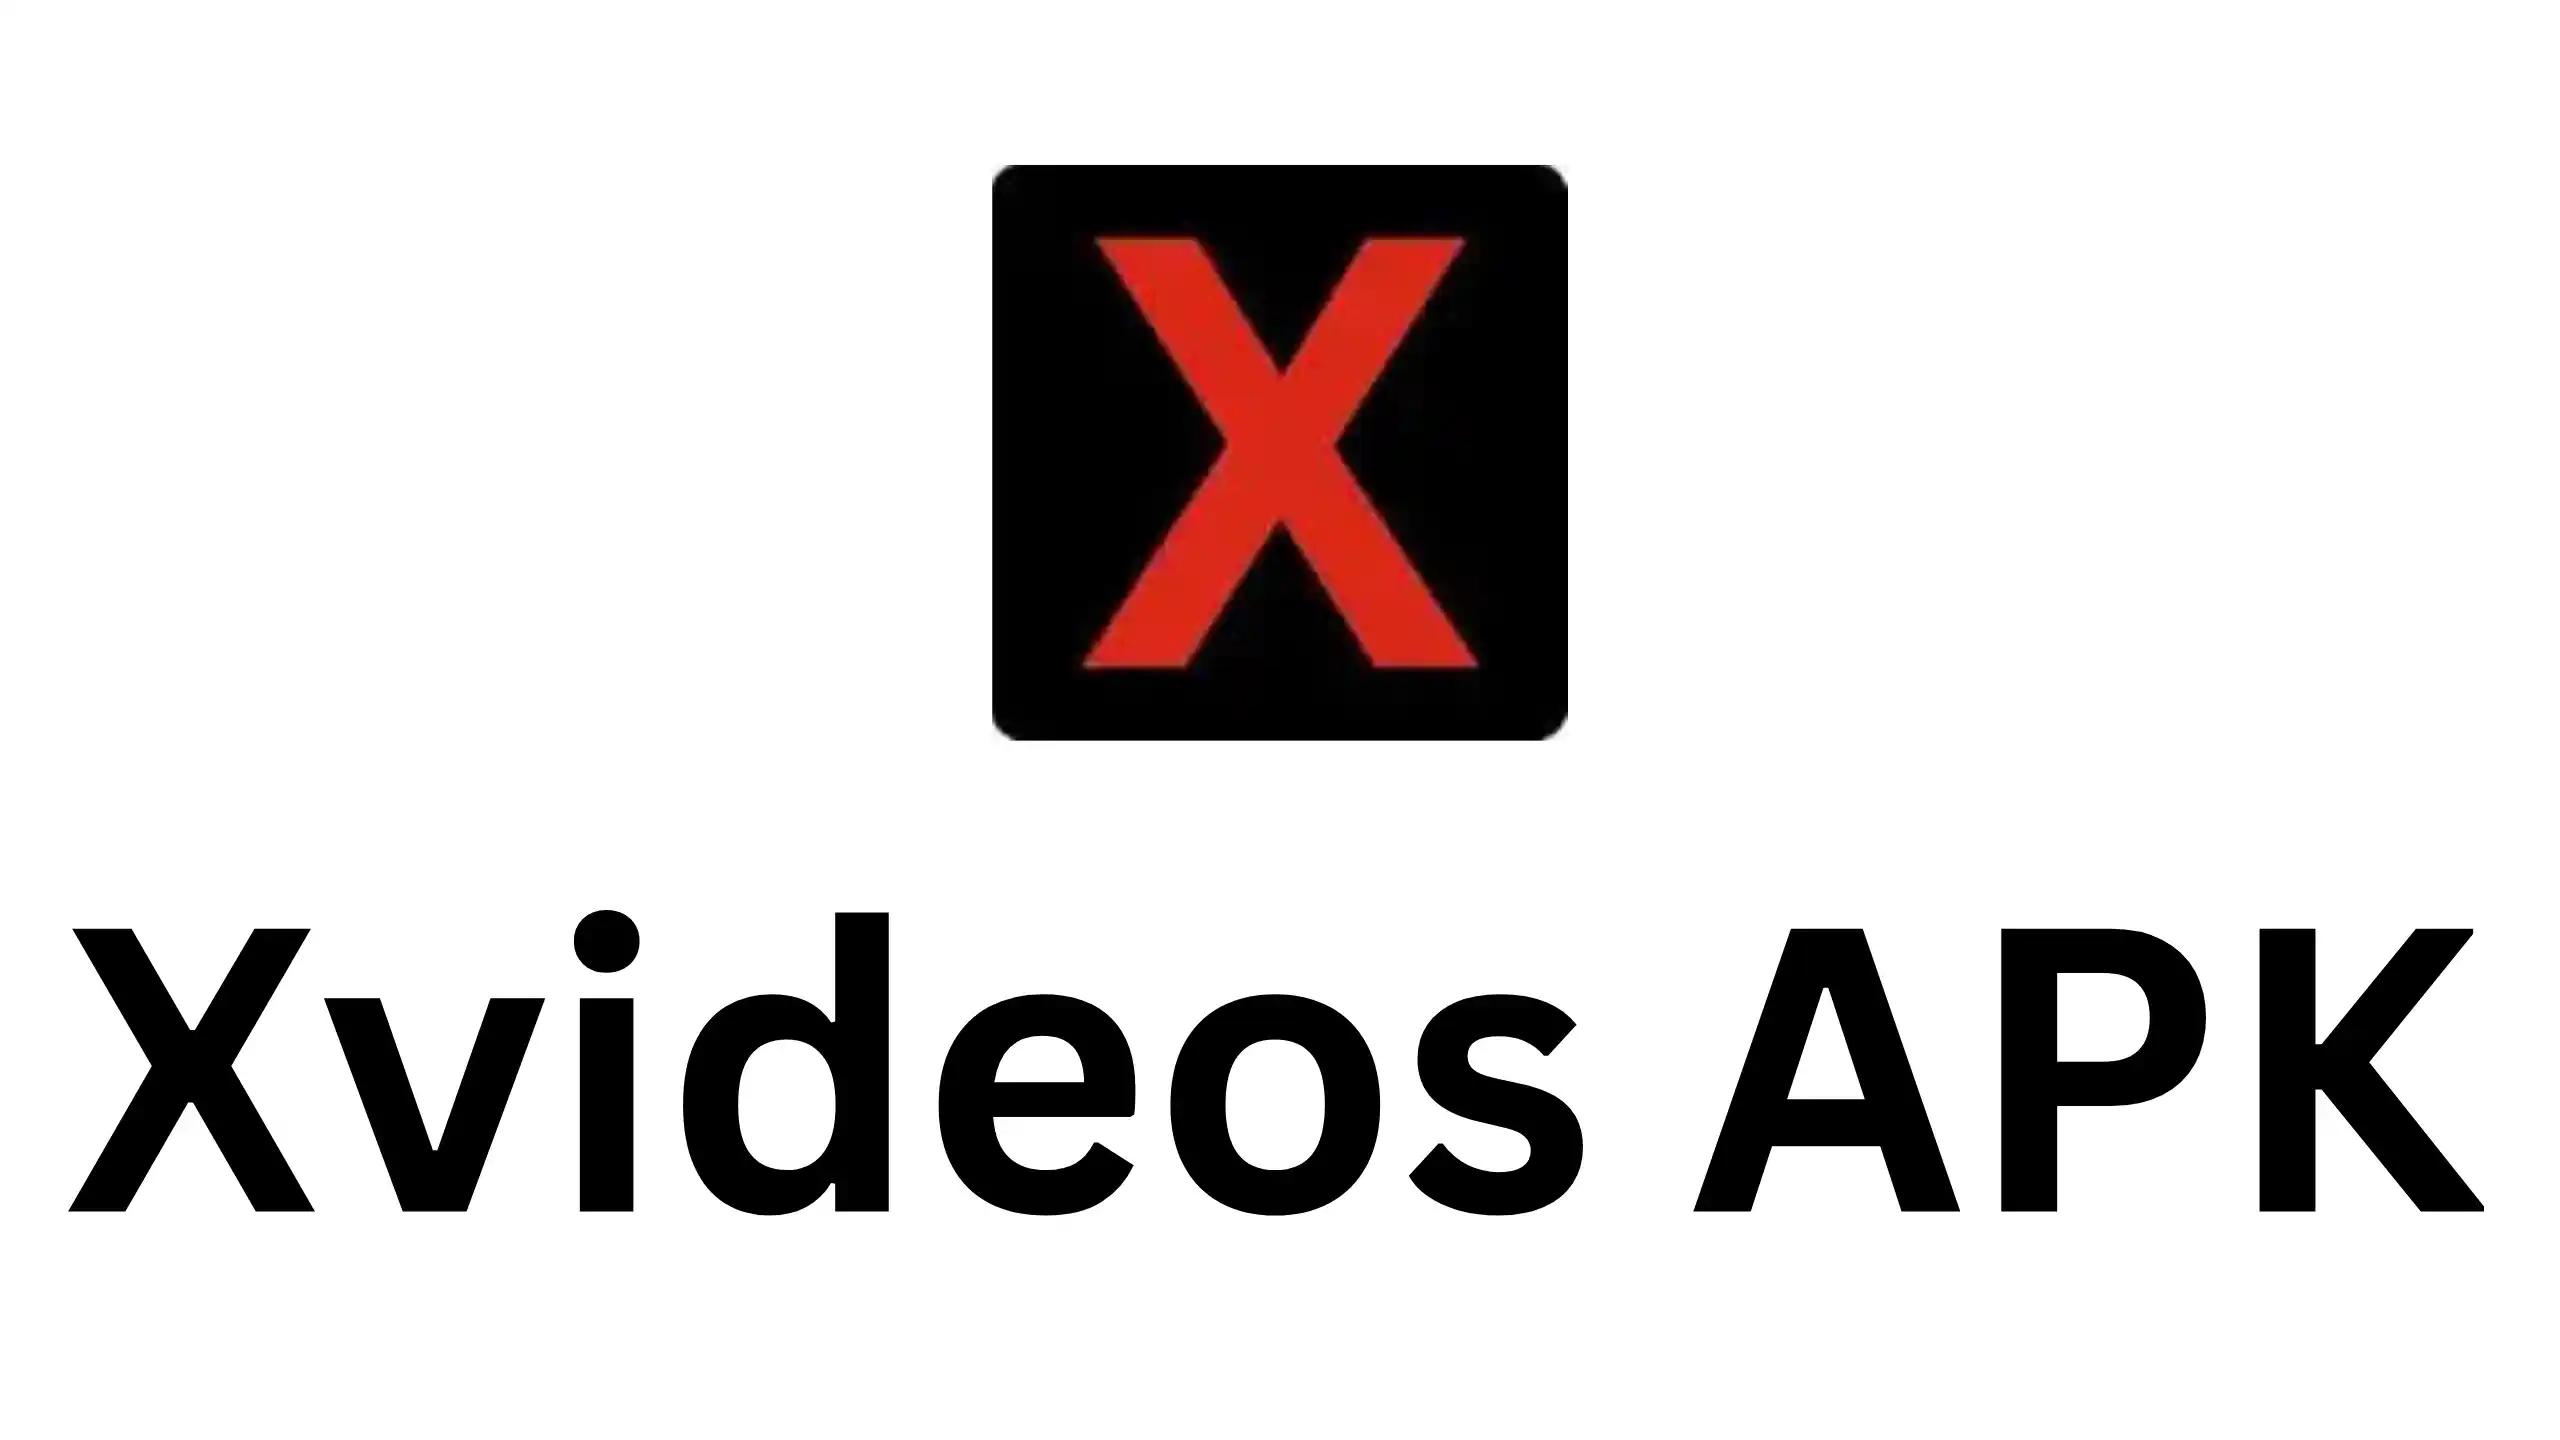 Xvideos.red apk